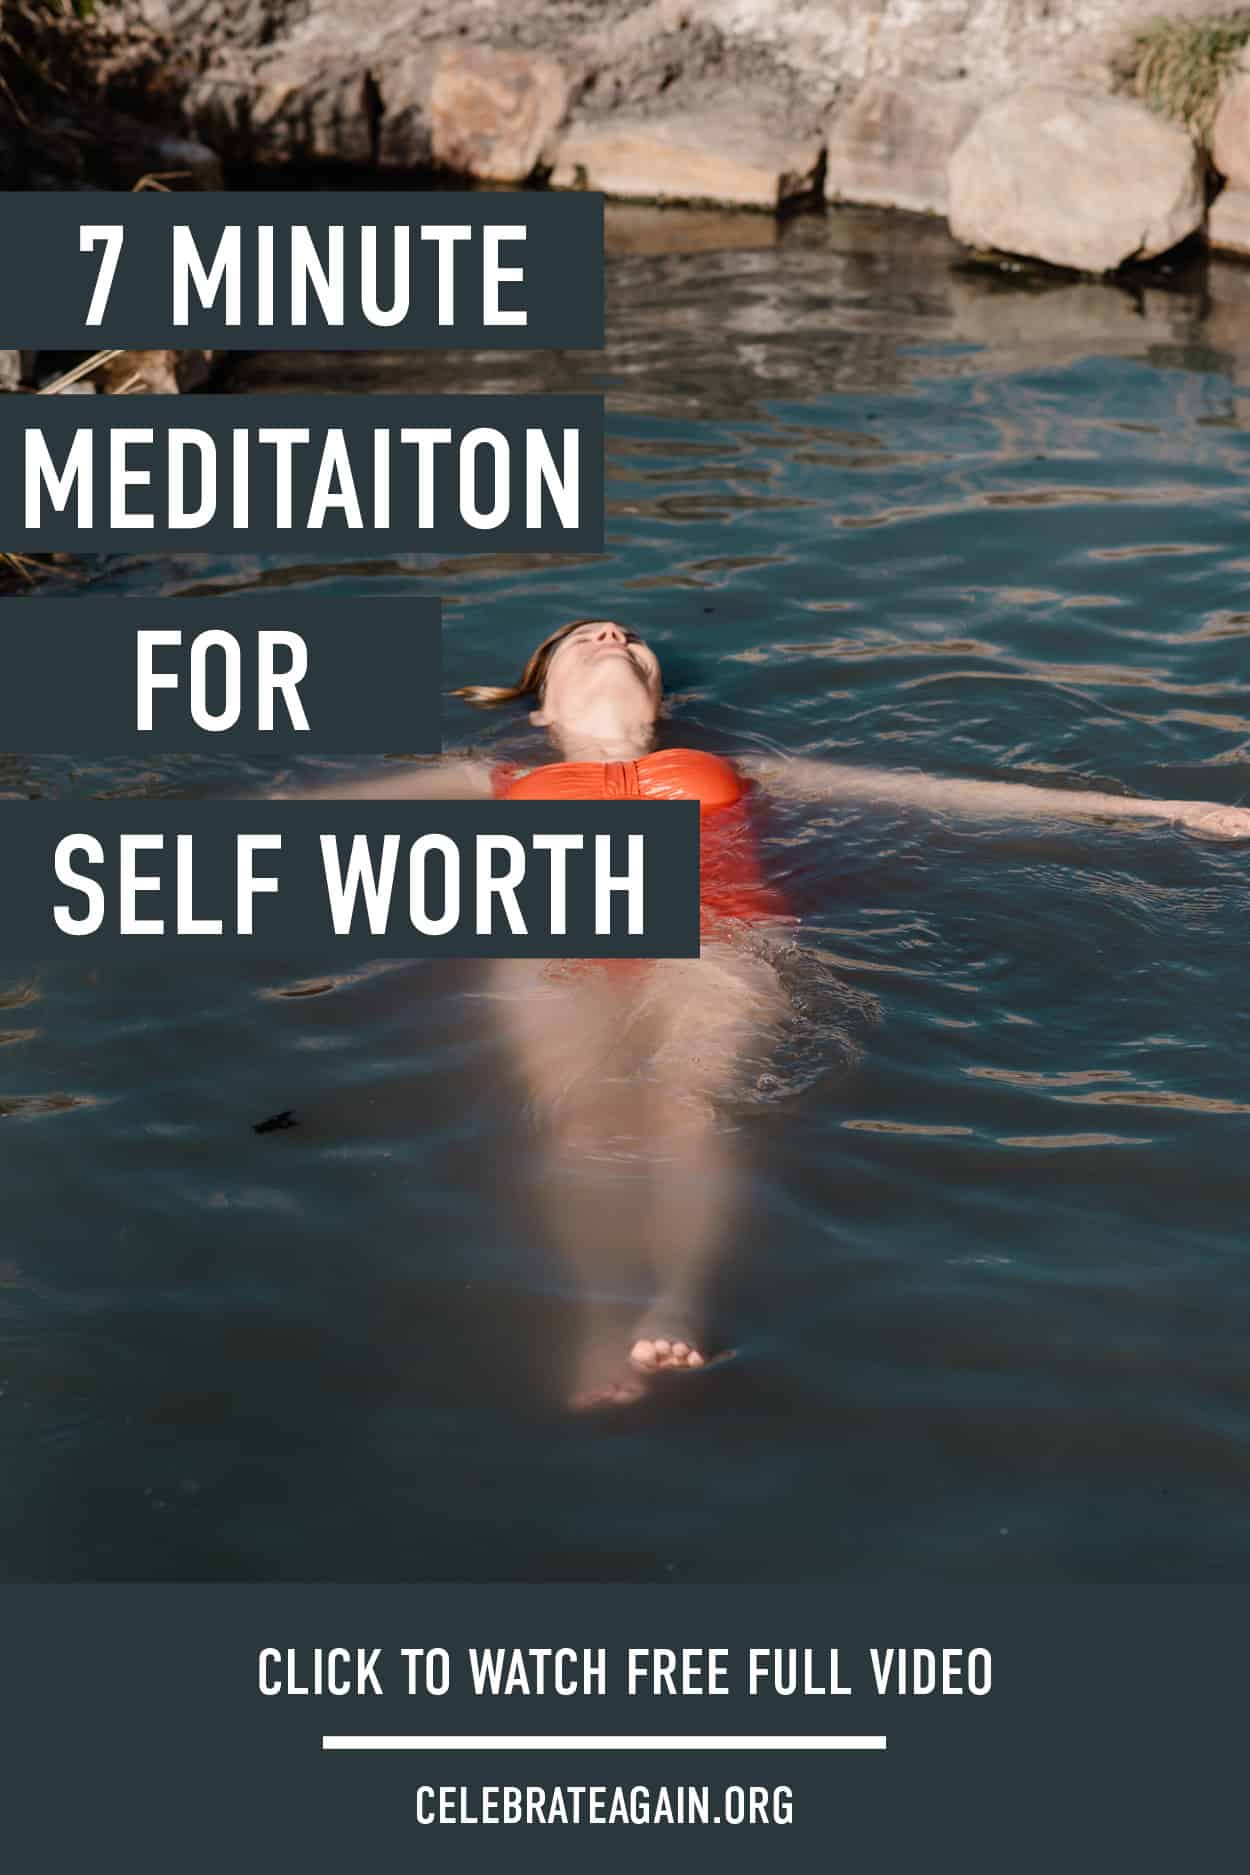 "7 minute meditation for self worth" video of female floating in a hot spring in a red swim suit